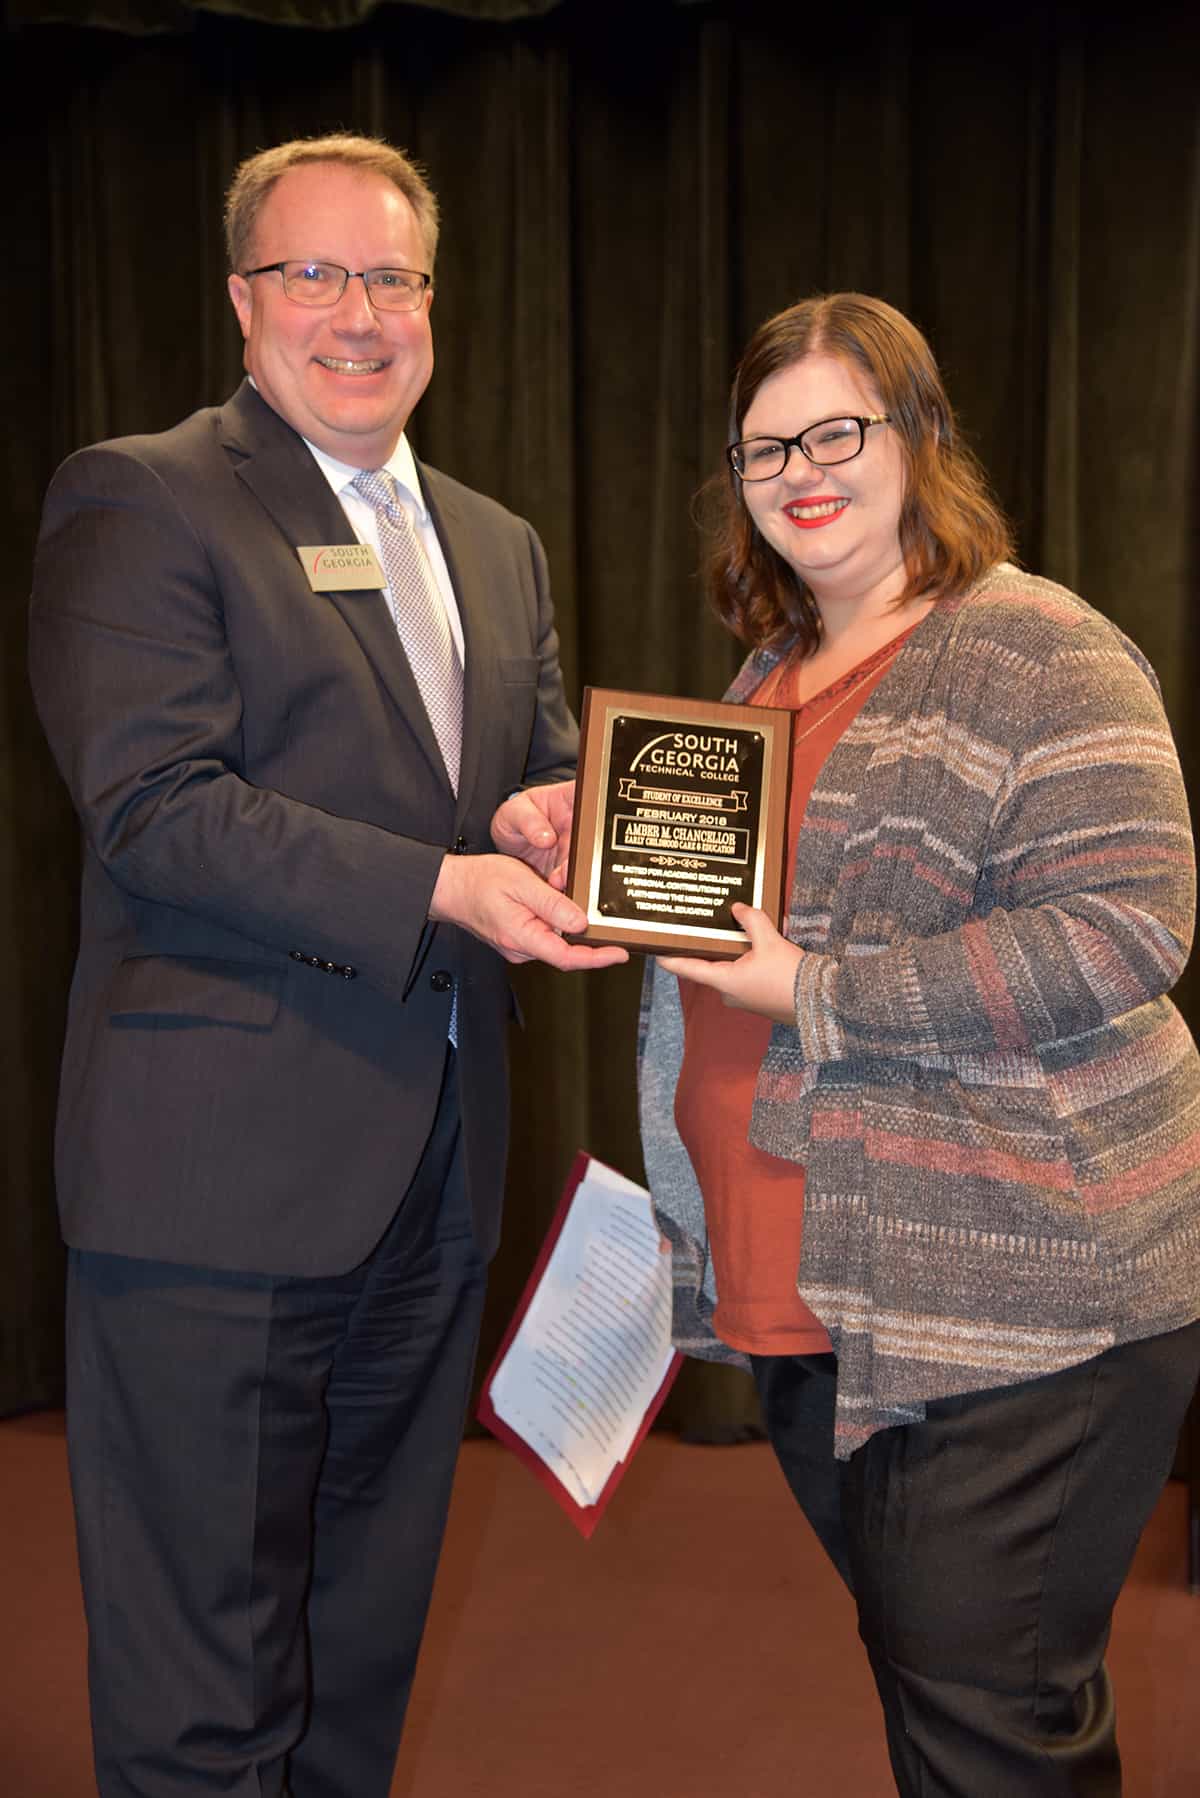 February 2018 Student of Excellence winner Amber Chancellor, right, accepts her award from South Georgia Technical College Dean of Academic Affairs David Kuipers.